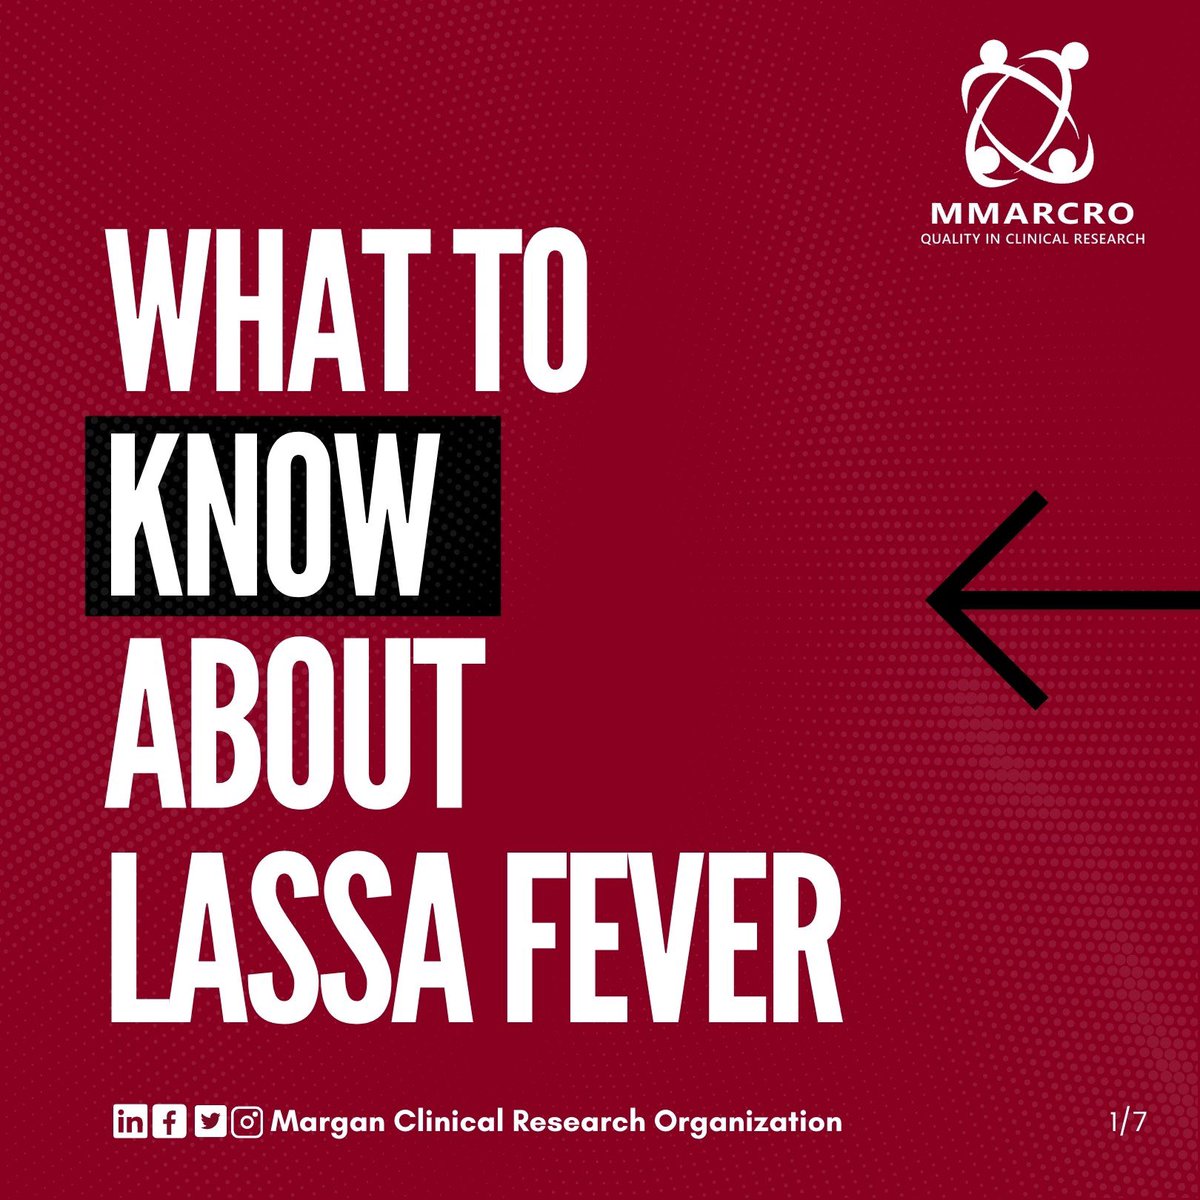 Here are a few slides explaining what you need to know about Lassa fever 🤒 

We wish you all a productive week 🙏🏽
@margancro 

#marganclinicalresearch #mmarcro #lassafeverawareness #lassafever #lassafeverprevention